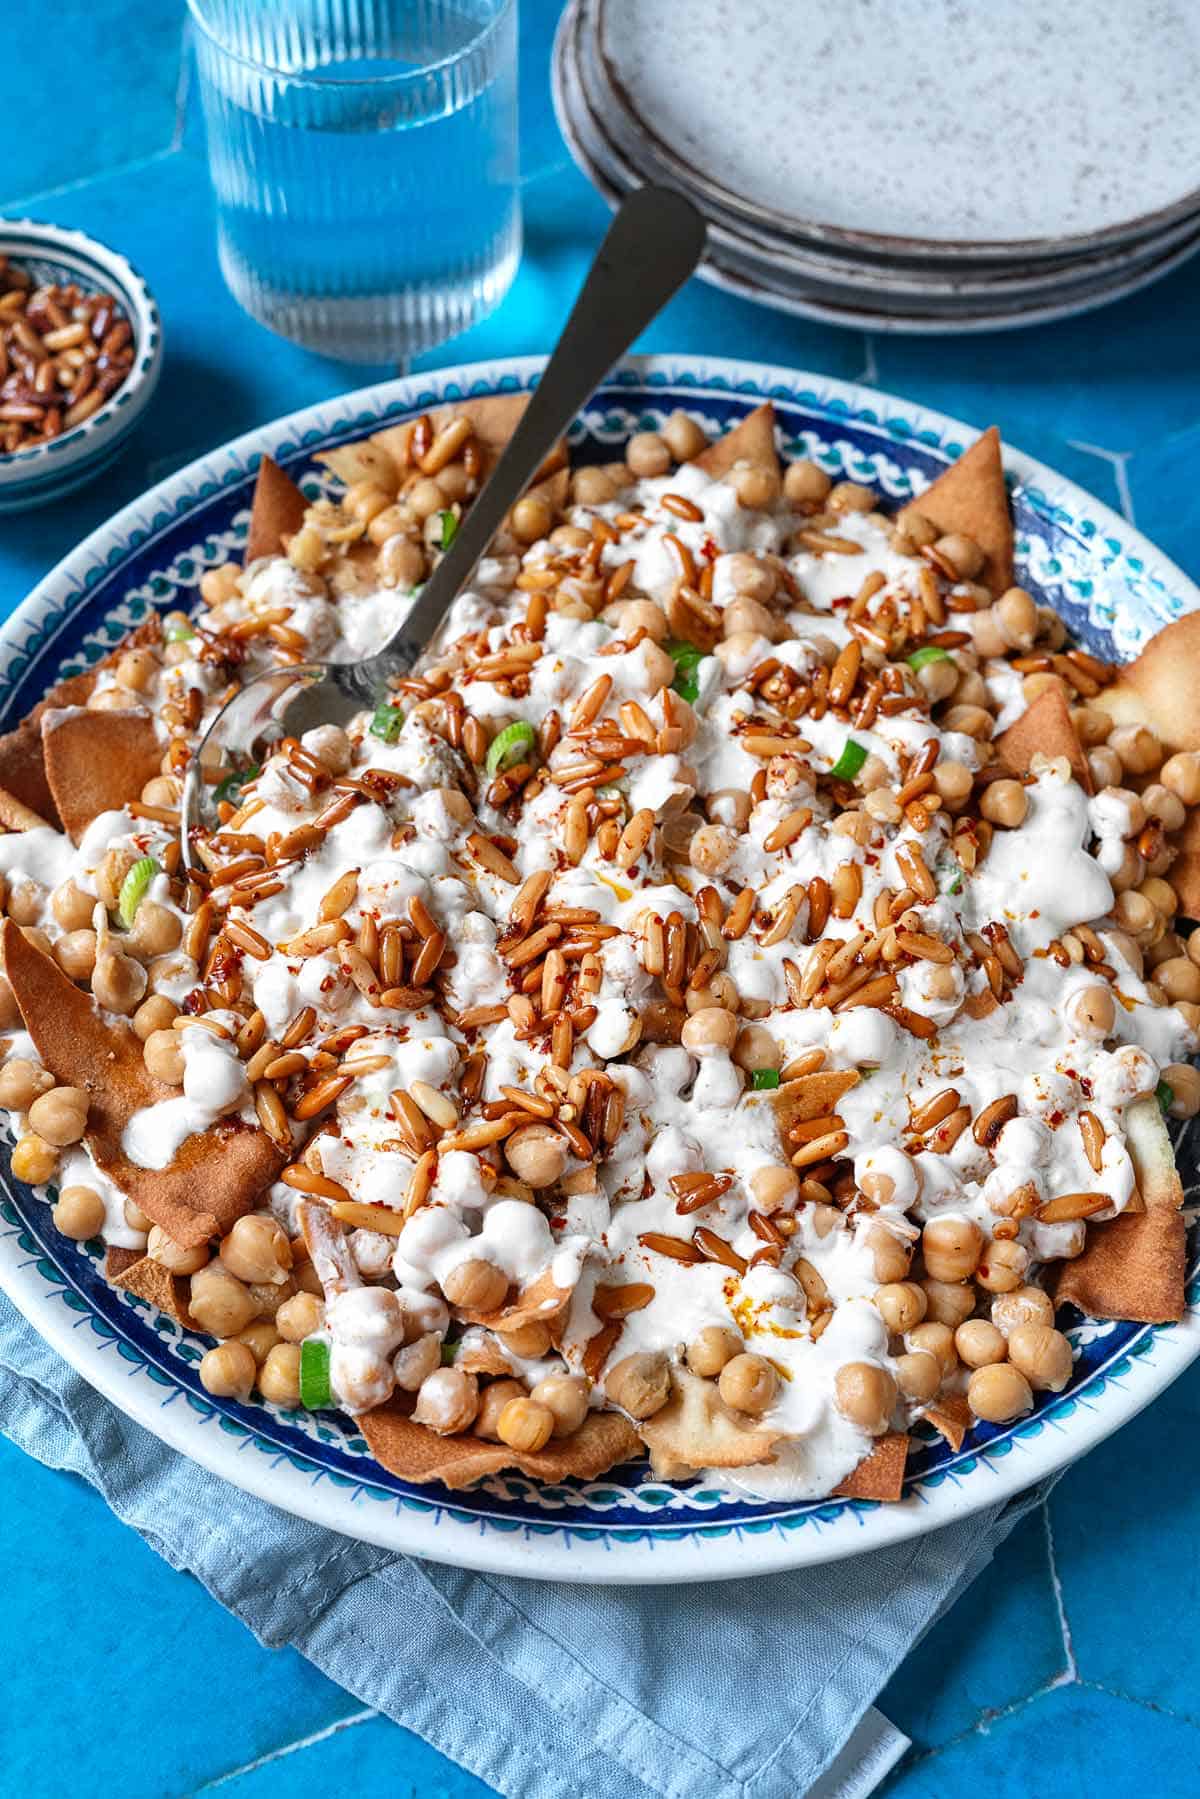 Fatteh (Spiced Chickpeas with Crispy Pita and Garlicky Yogurt) in a bowl with a spoon next to a glass of water.